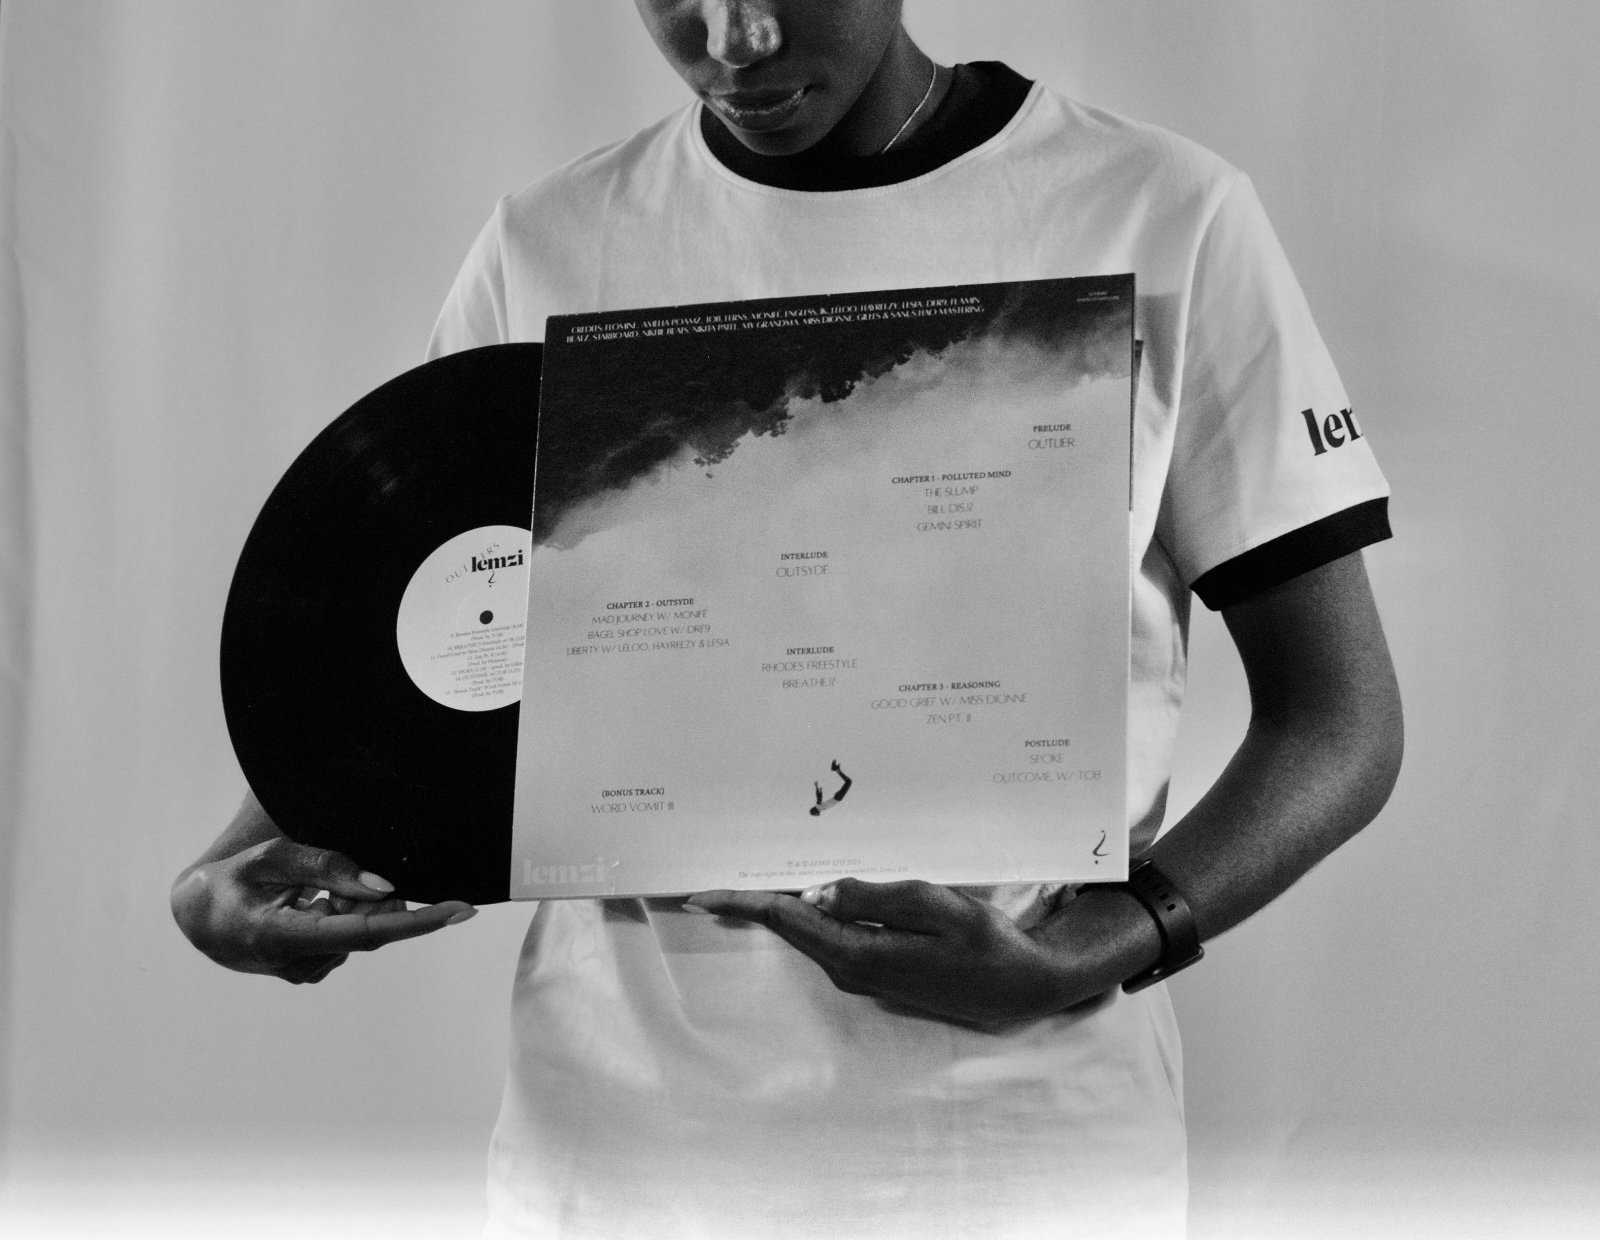 Outliers - A Creative Project by Lemzi is now available on vinyl